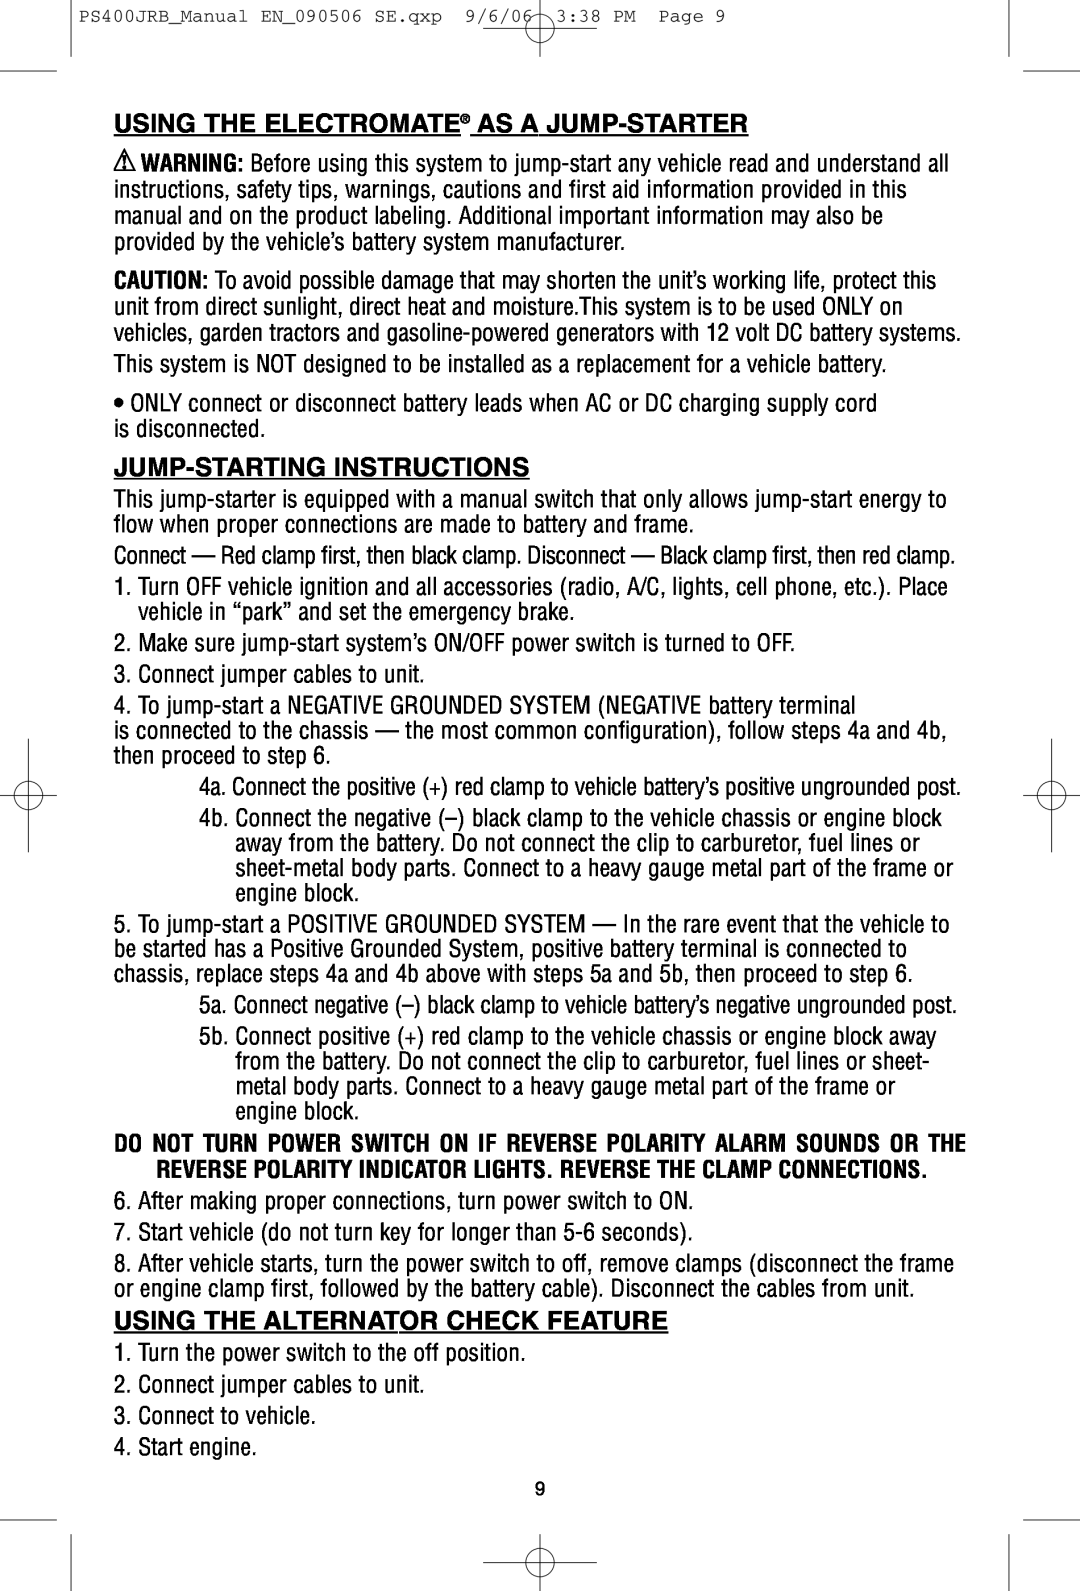 Black & Decker PS400JRB instruction manual Using The Electromate As A Jump-Starter, Jump-Starting Instructions 